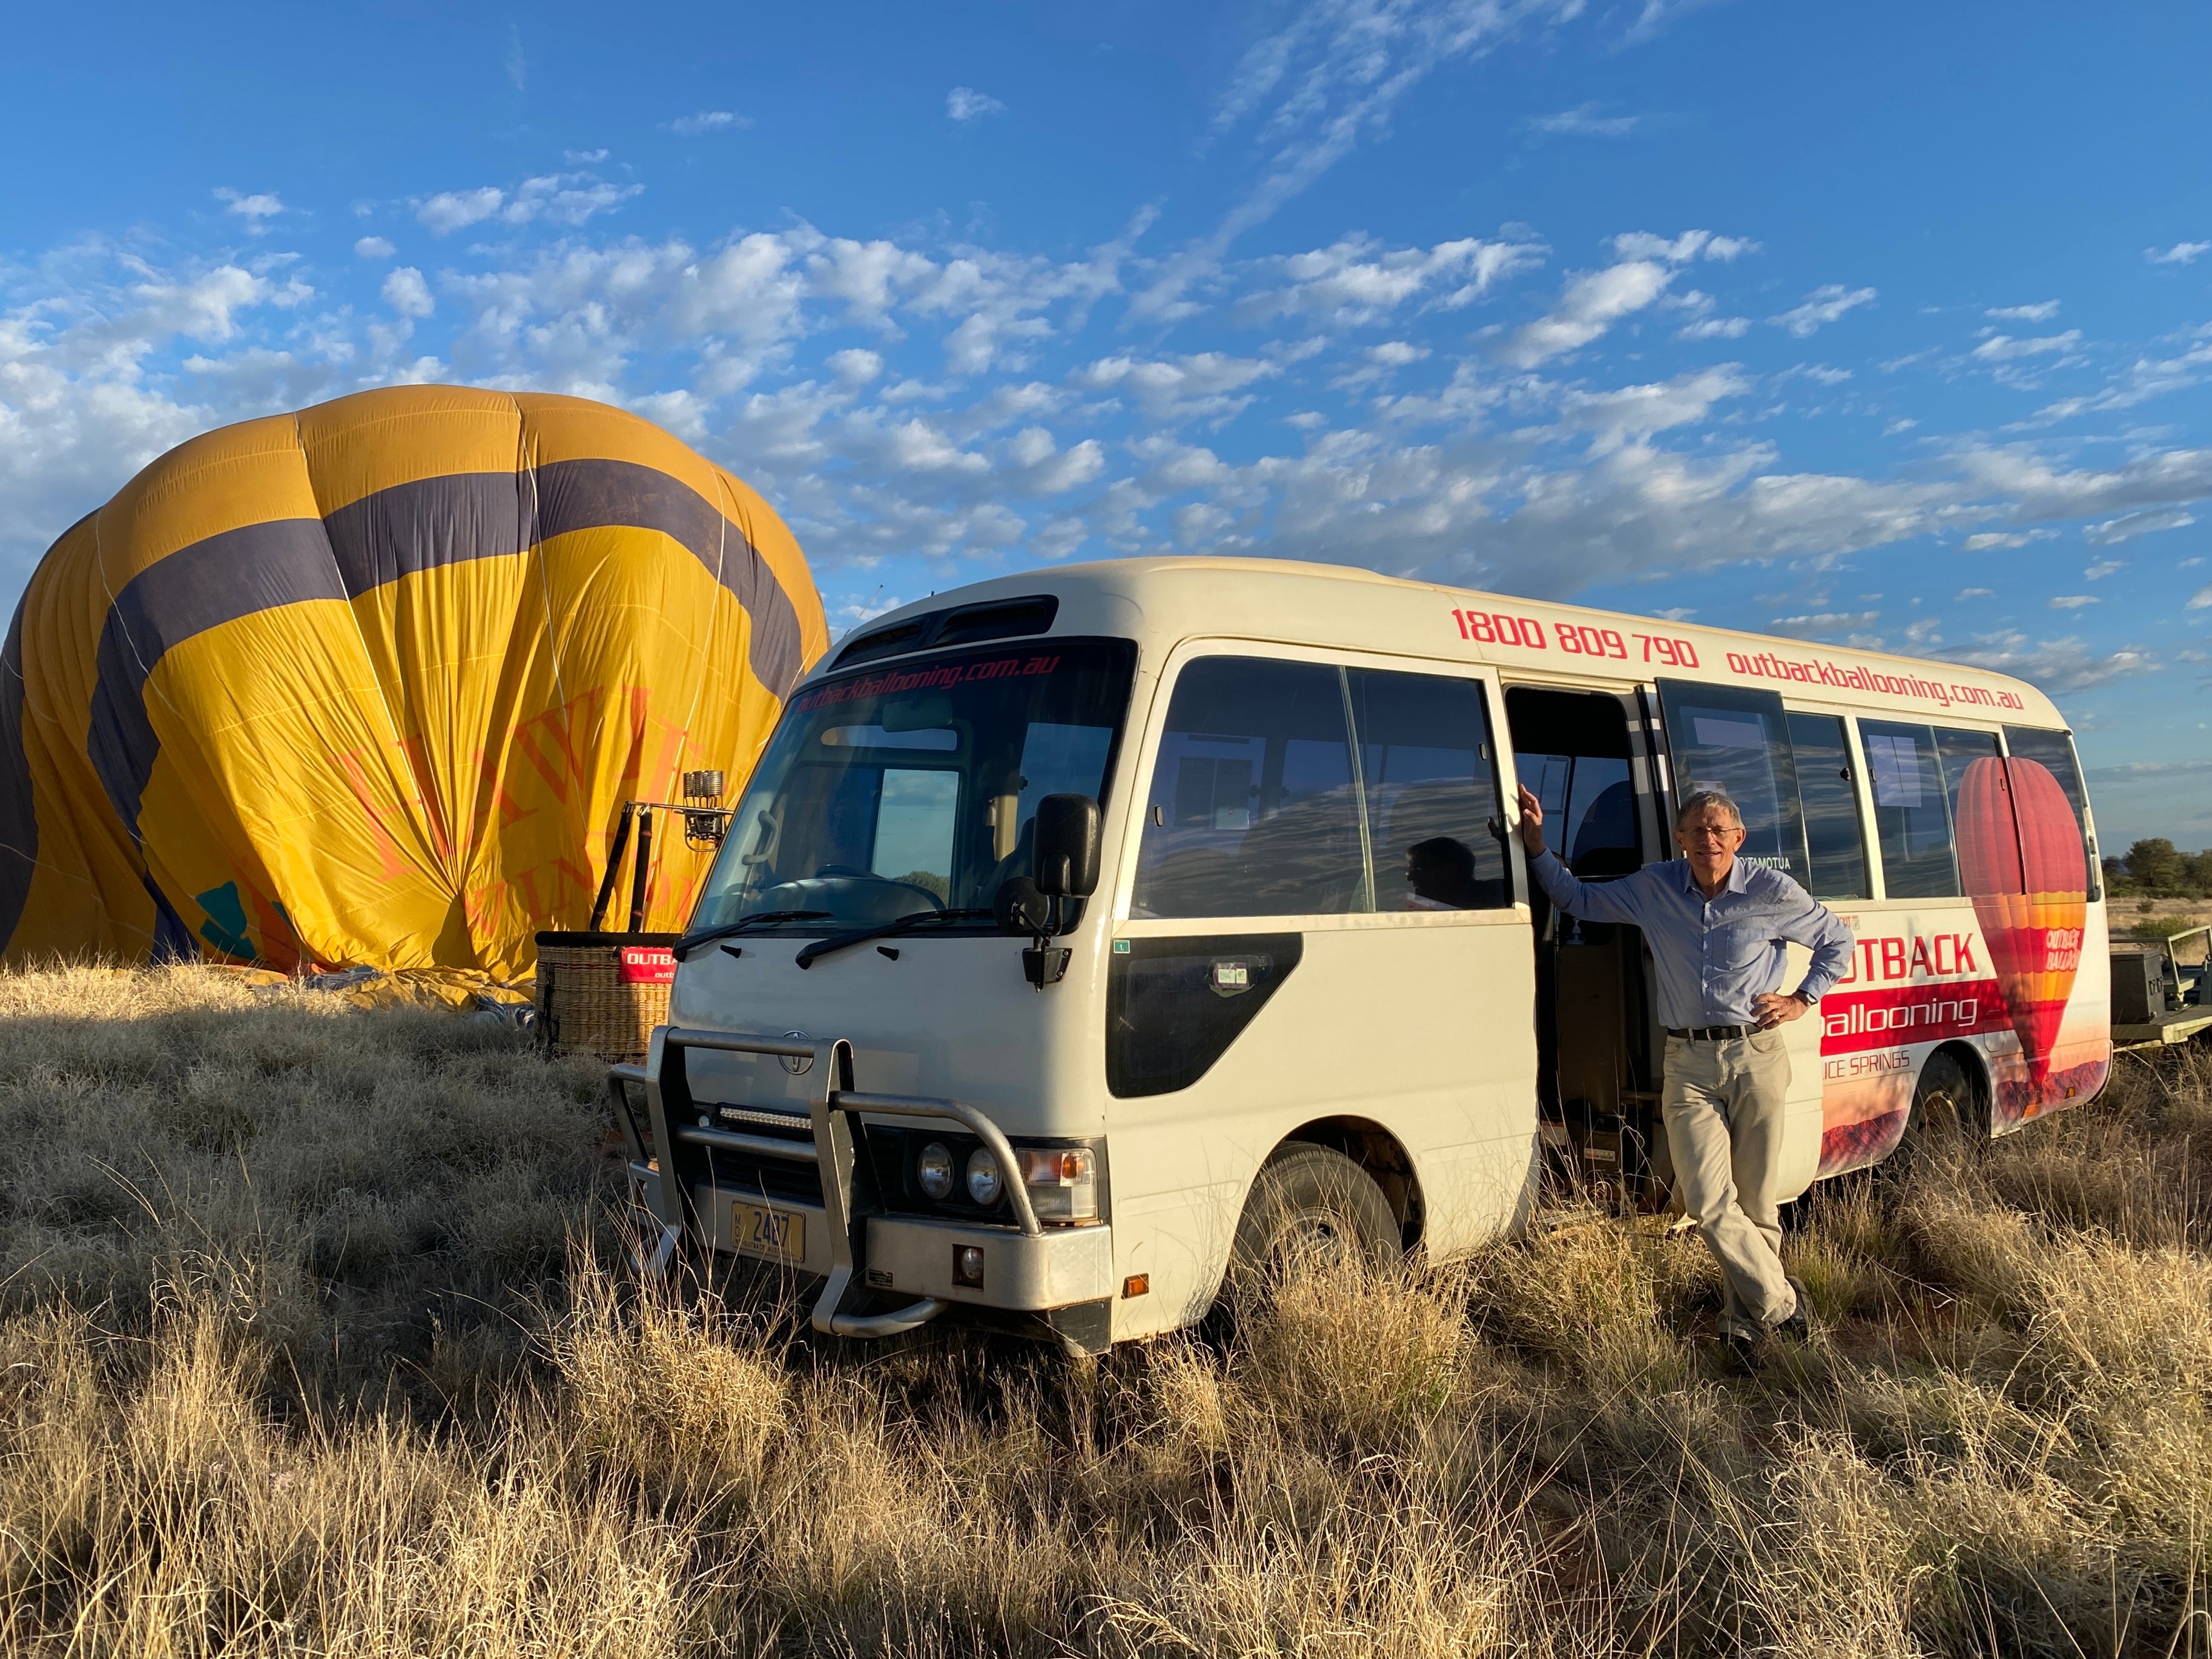 To truly experience the epic beauty of Alice Springs, it’s best to take to the air, as Simon discovered